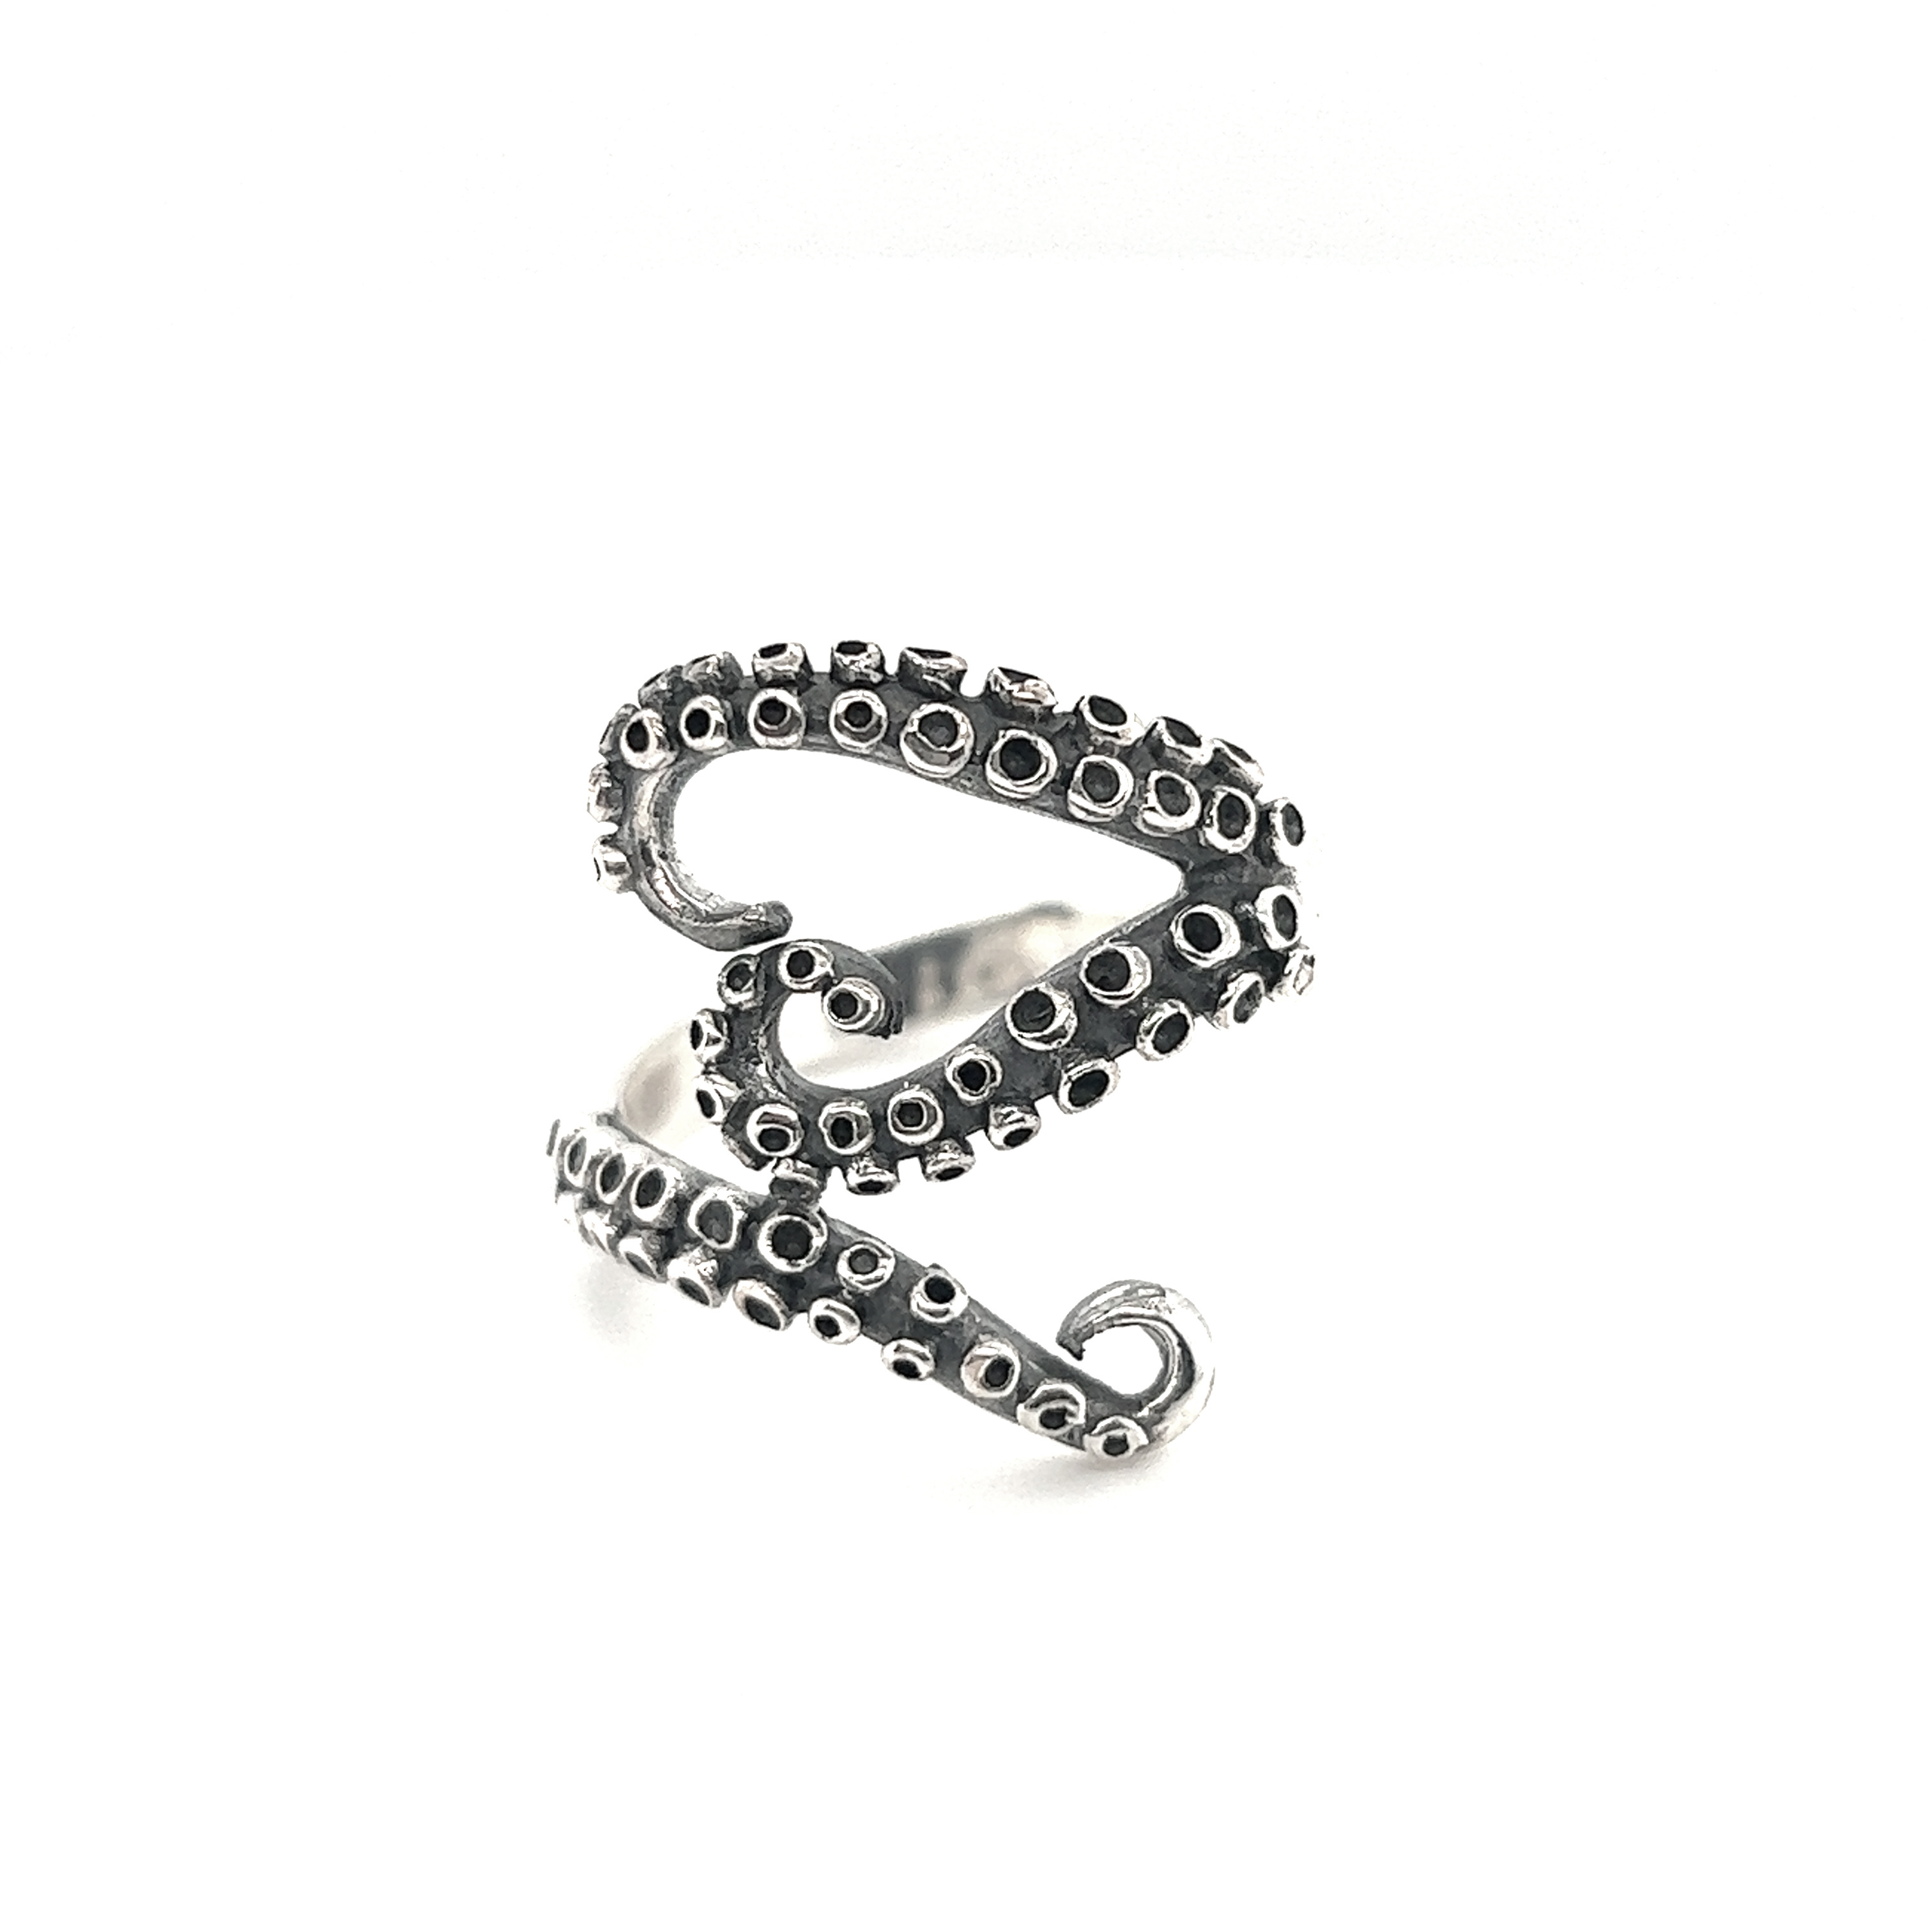 Intricate Octopus Tentacle Ring – Super Silver